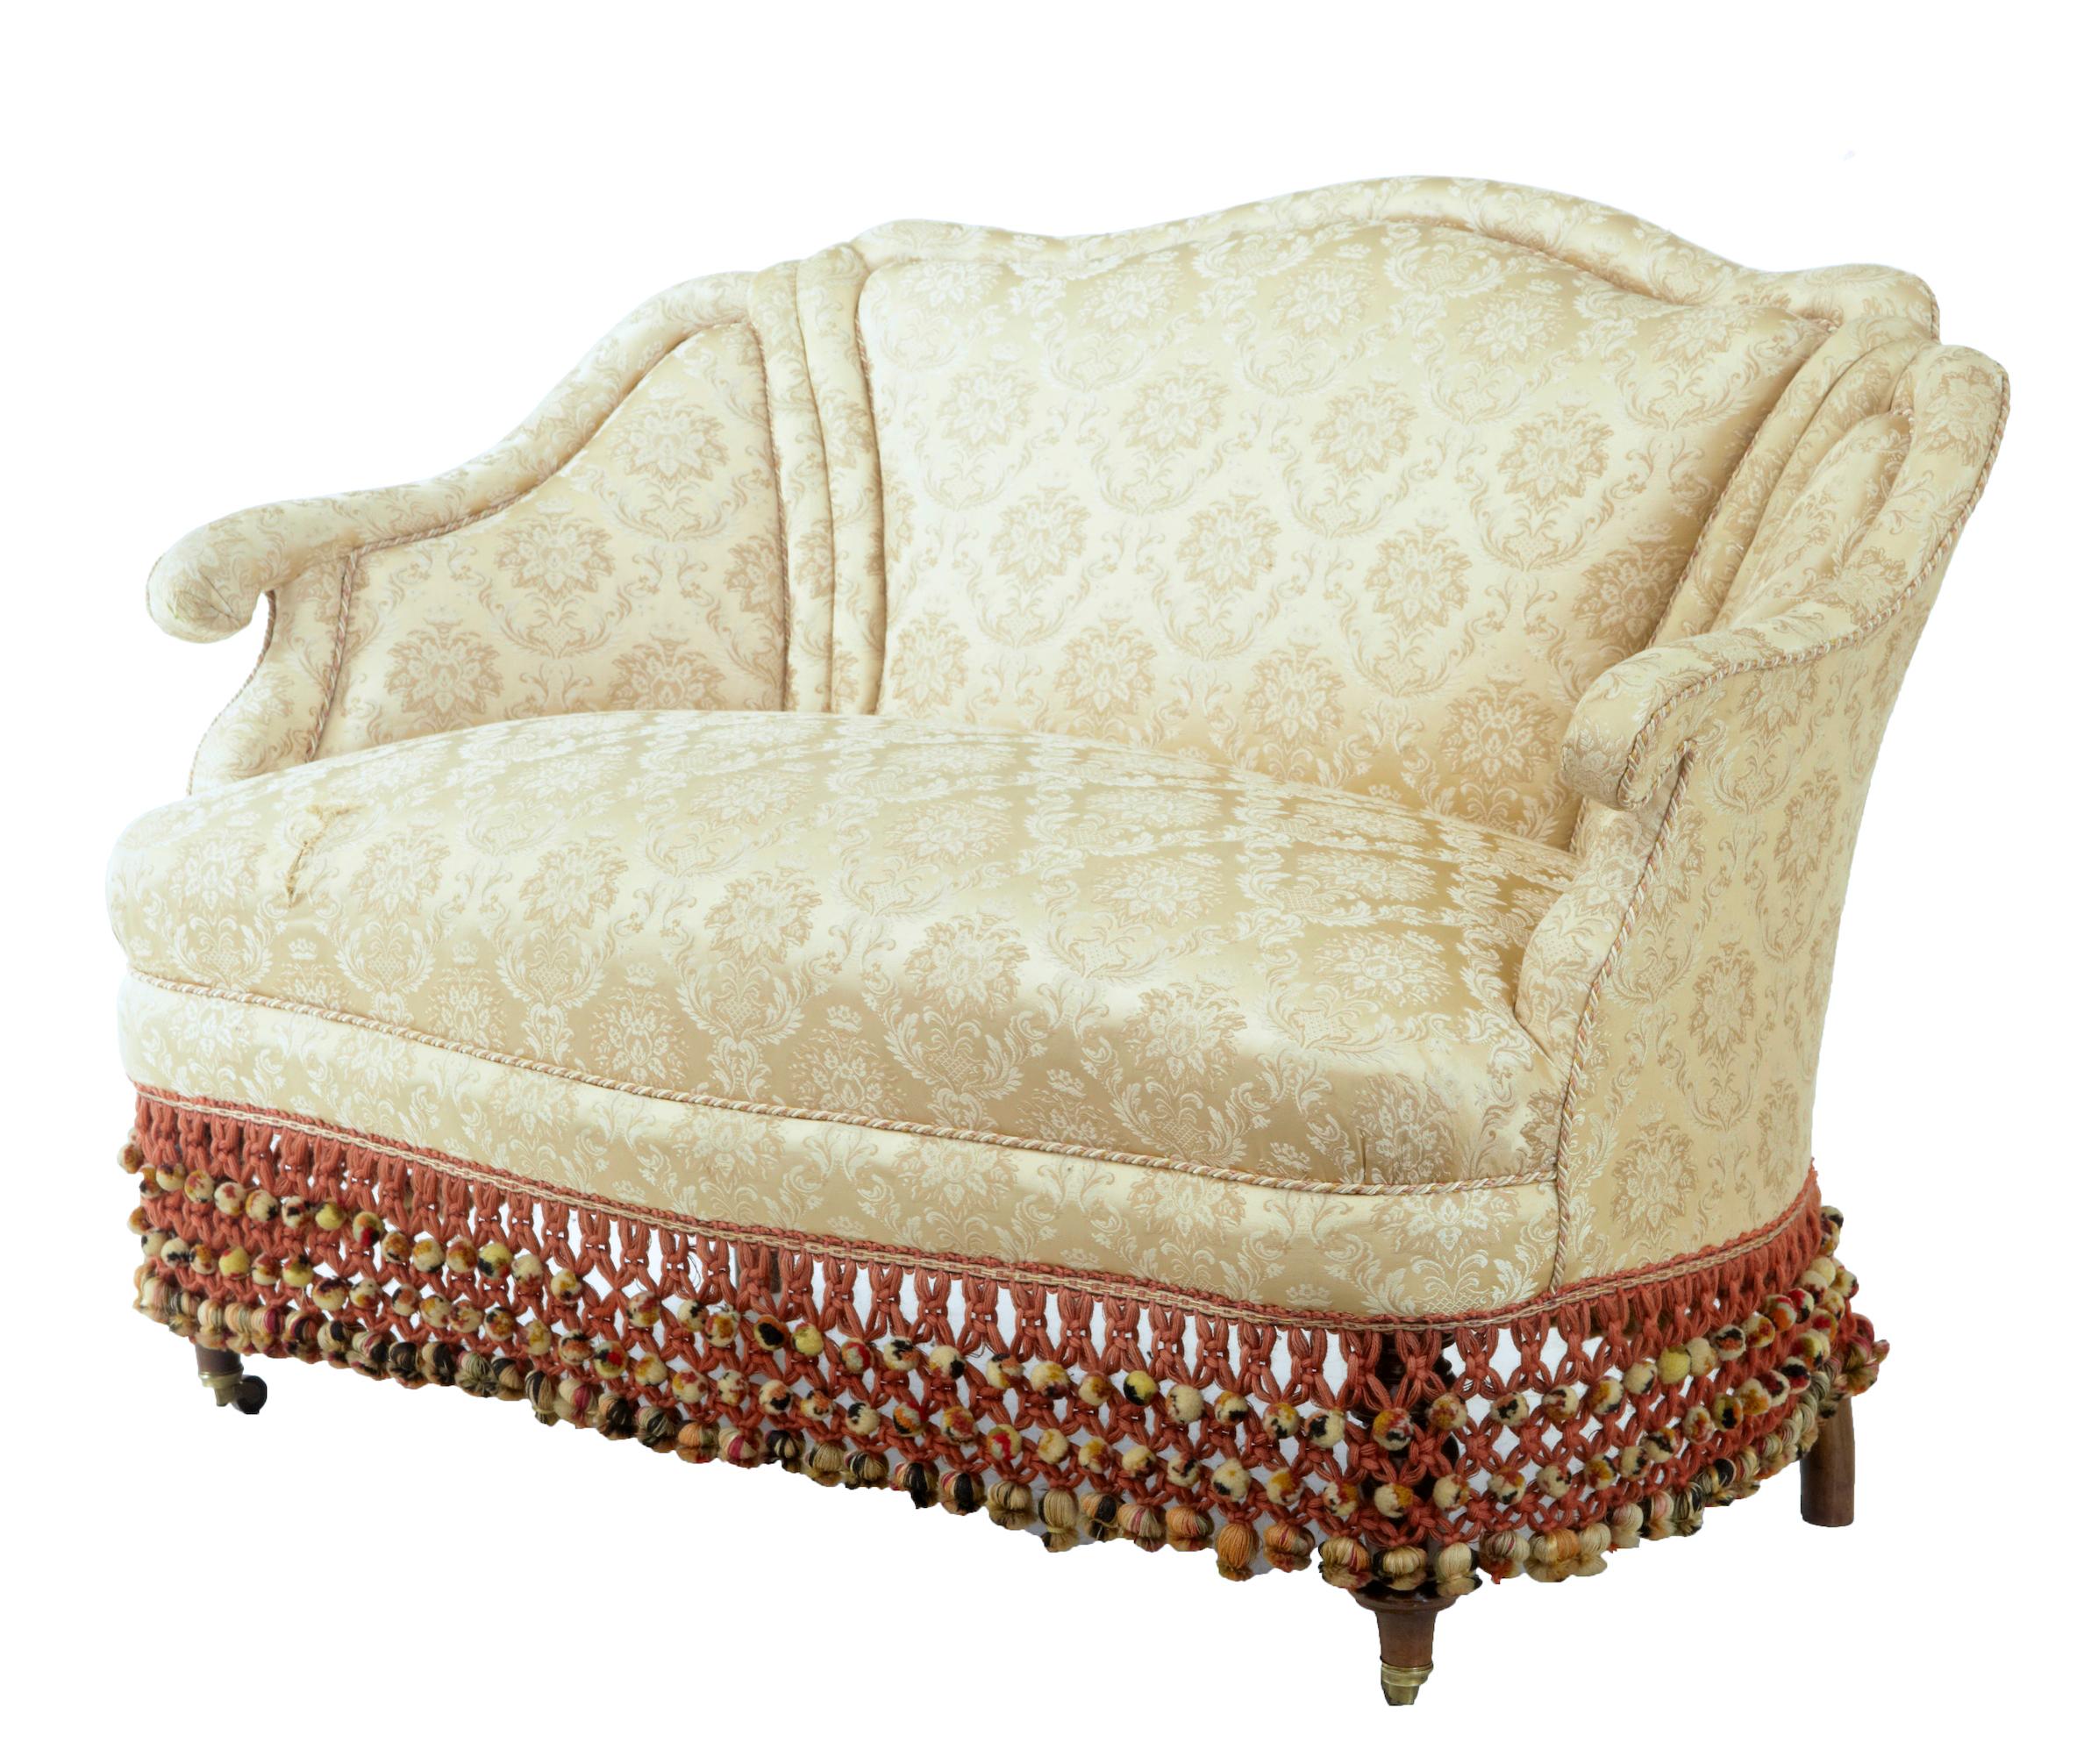 Early 20th century French boudoire small bedroom sofa circa 1920.

Boudoire small shaped bedroom sofa. Shaped arms and back offering comfort for 2 people. Currently covered in a satin floral fabric and complementary piping and contrasting border